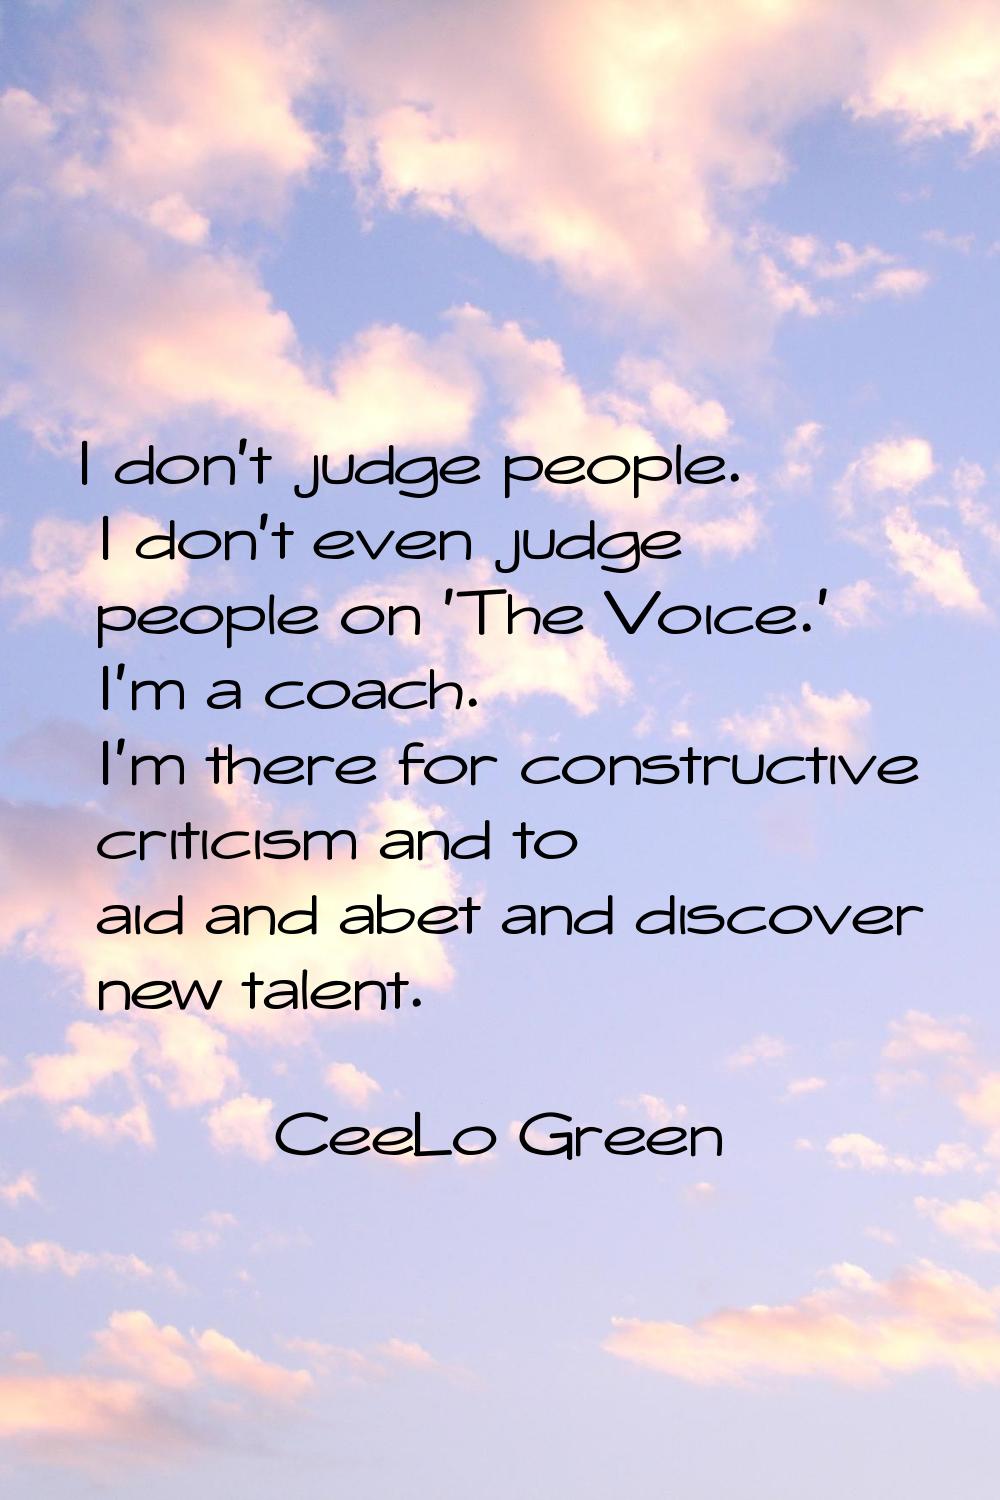 I don't judge people. I don't even judge people on 'The Voice.' I'm a coach. I'm there for construc